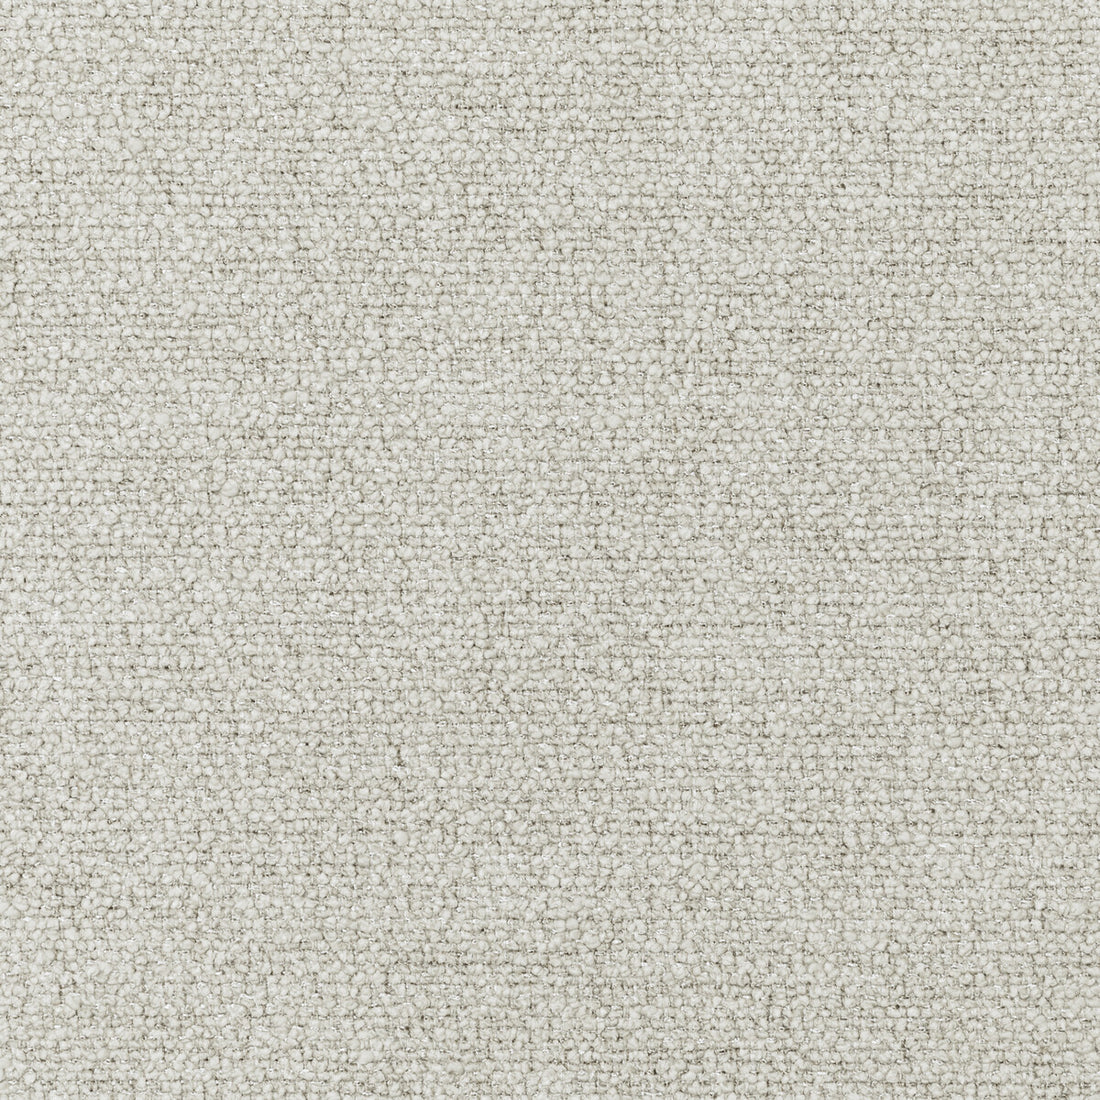 Bali Boucle fabric in pebble color - pattern 36051.11.0 - by Kravet Couture in the Luxury Textures II collection